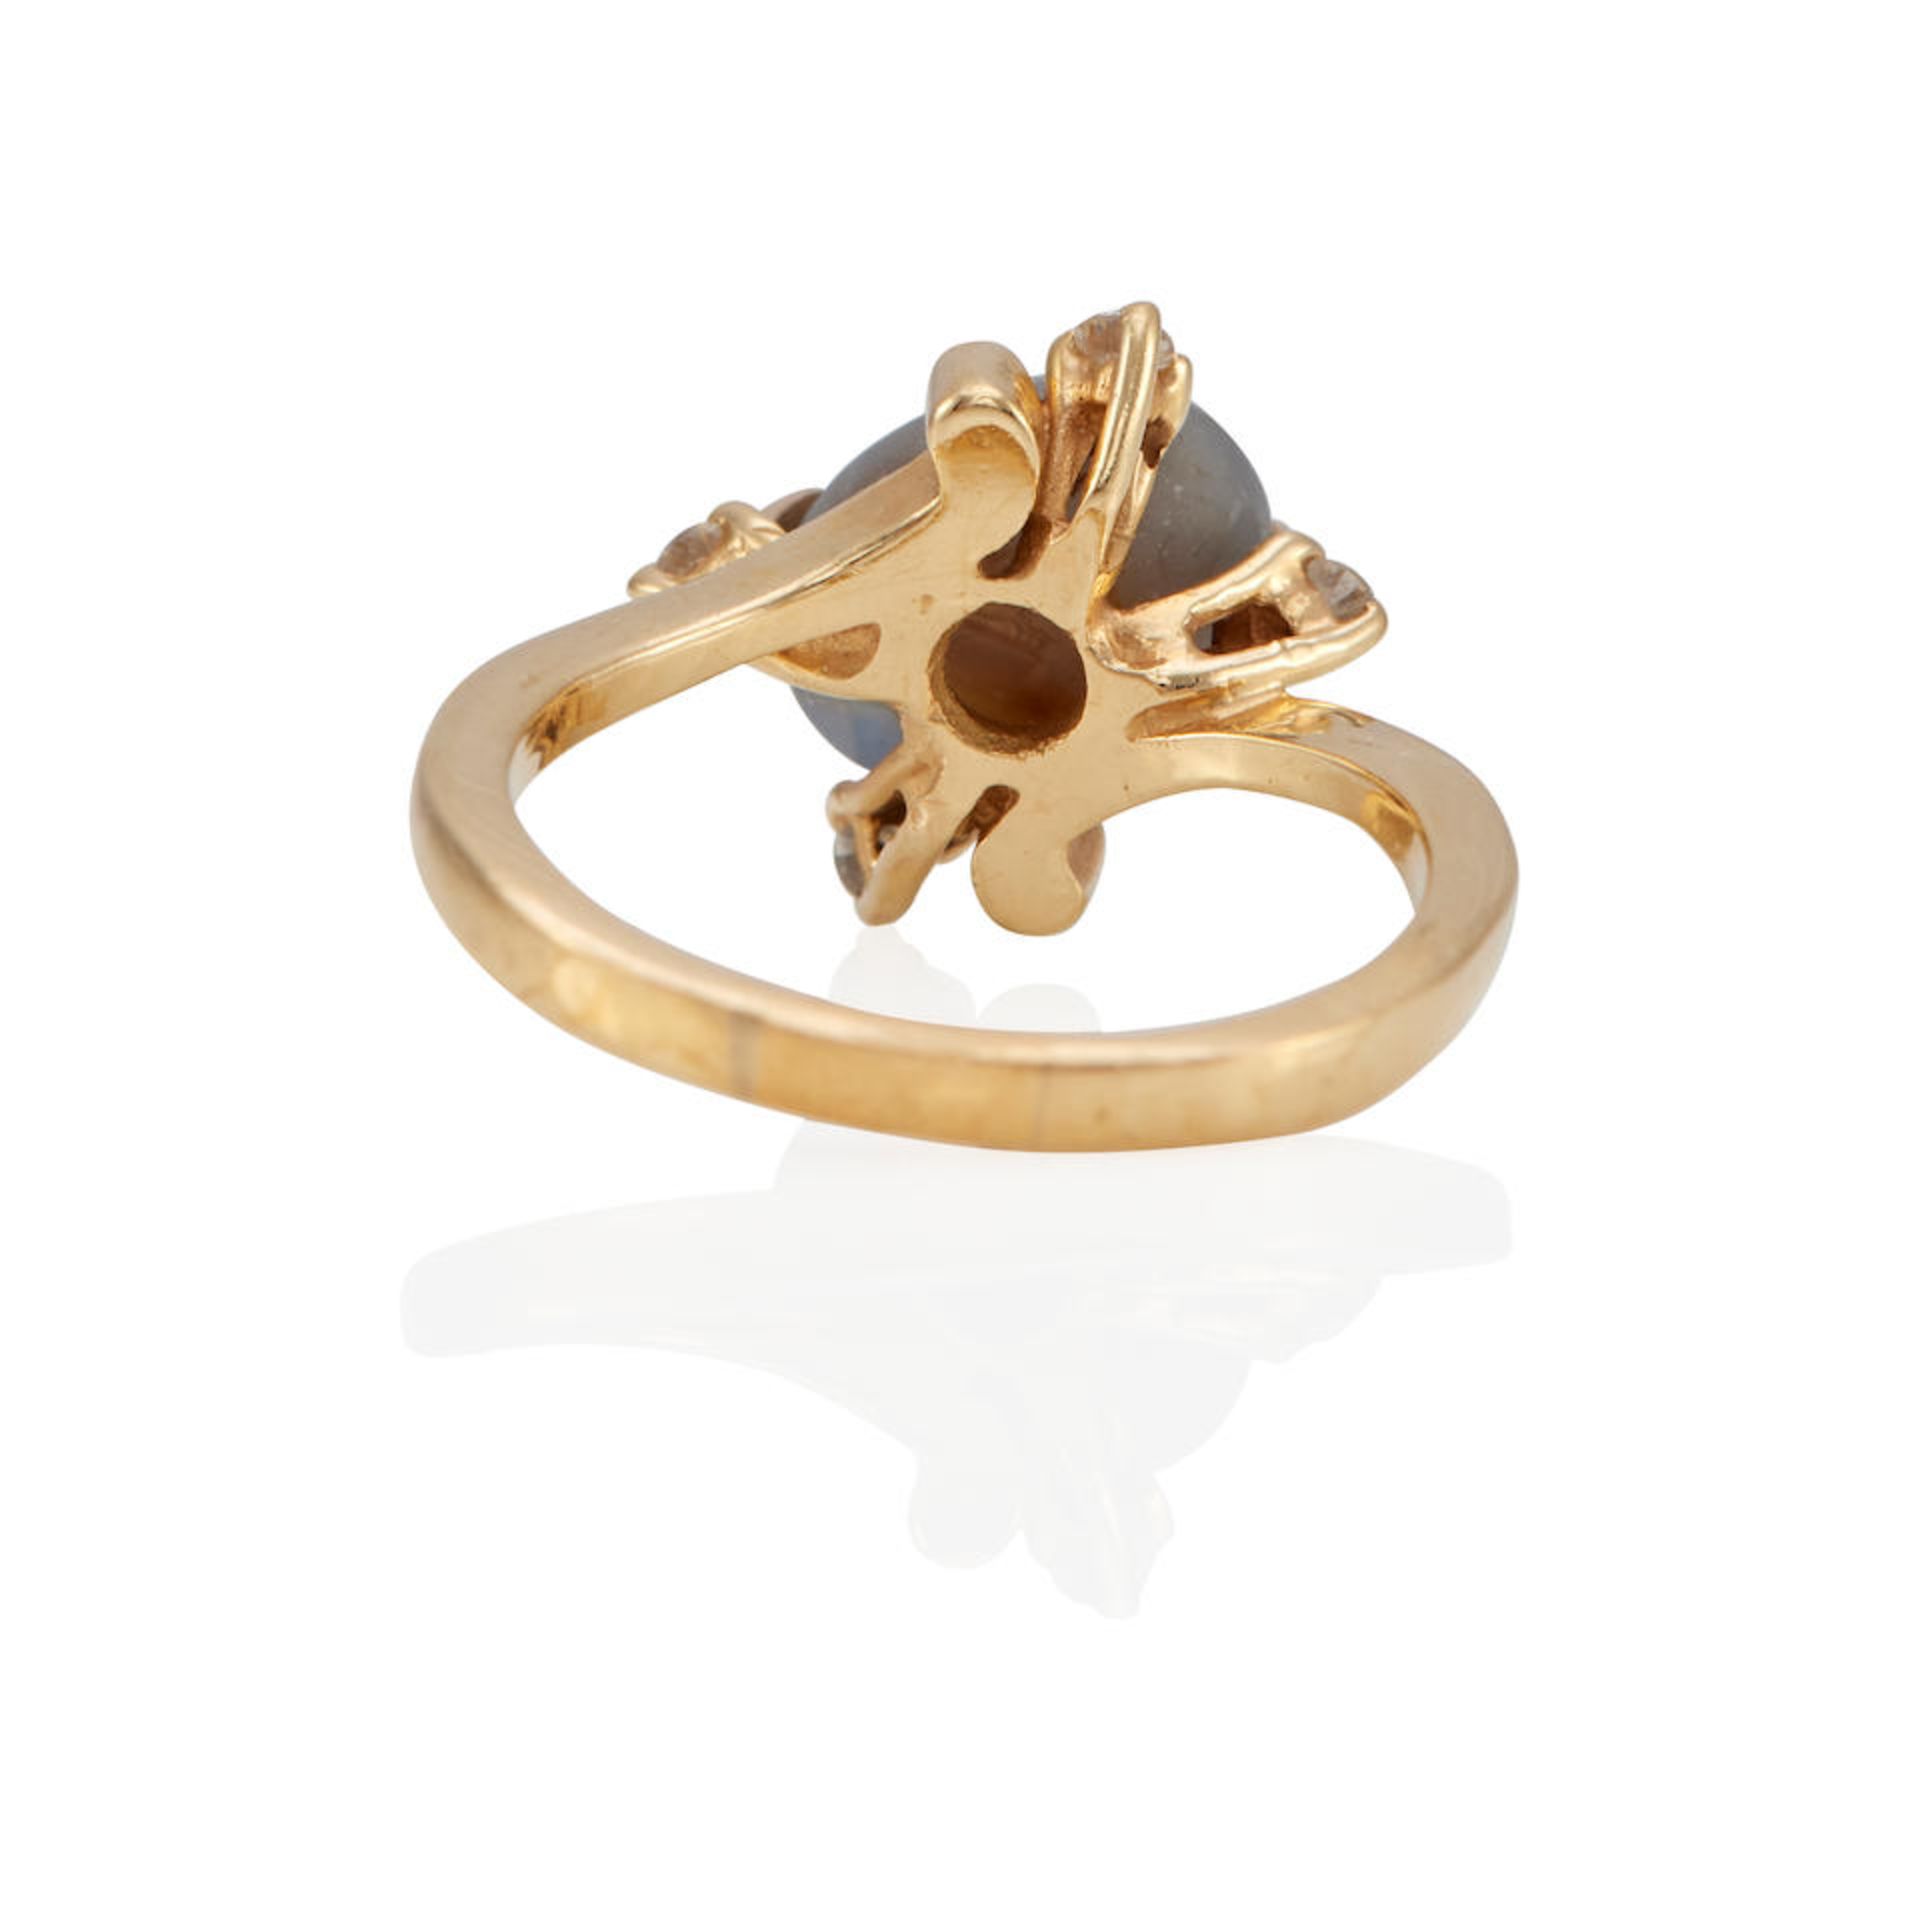 A 14K GOLD, STAR SAPPHIRE AND DIAMOND RING - Image 2 of 3